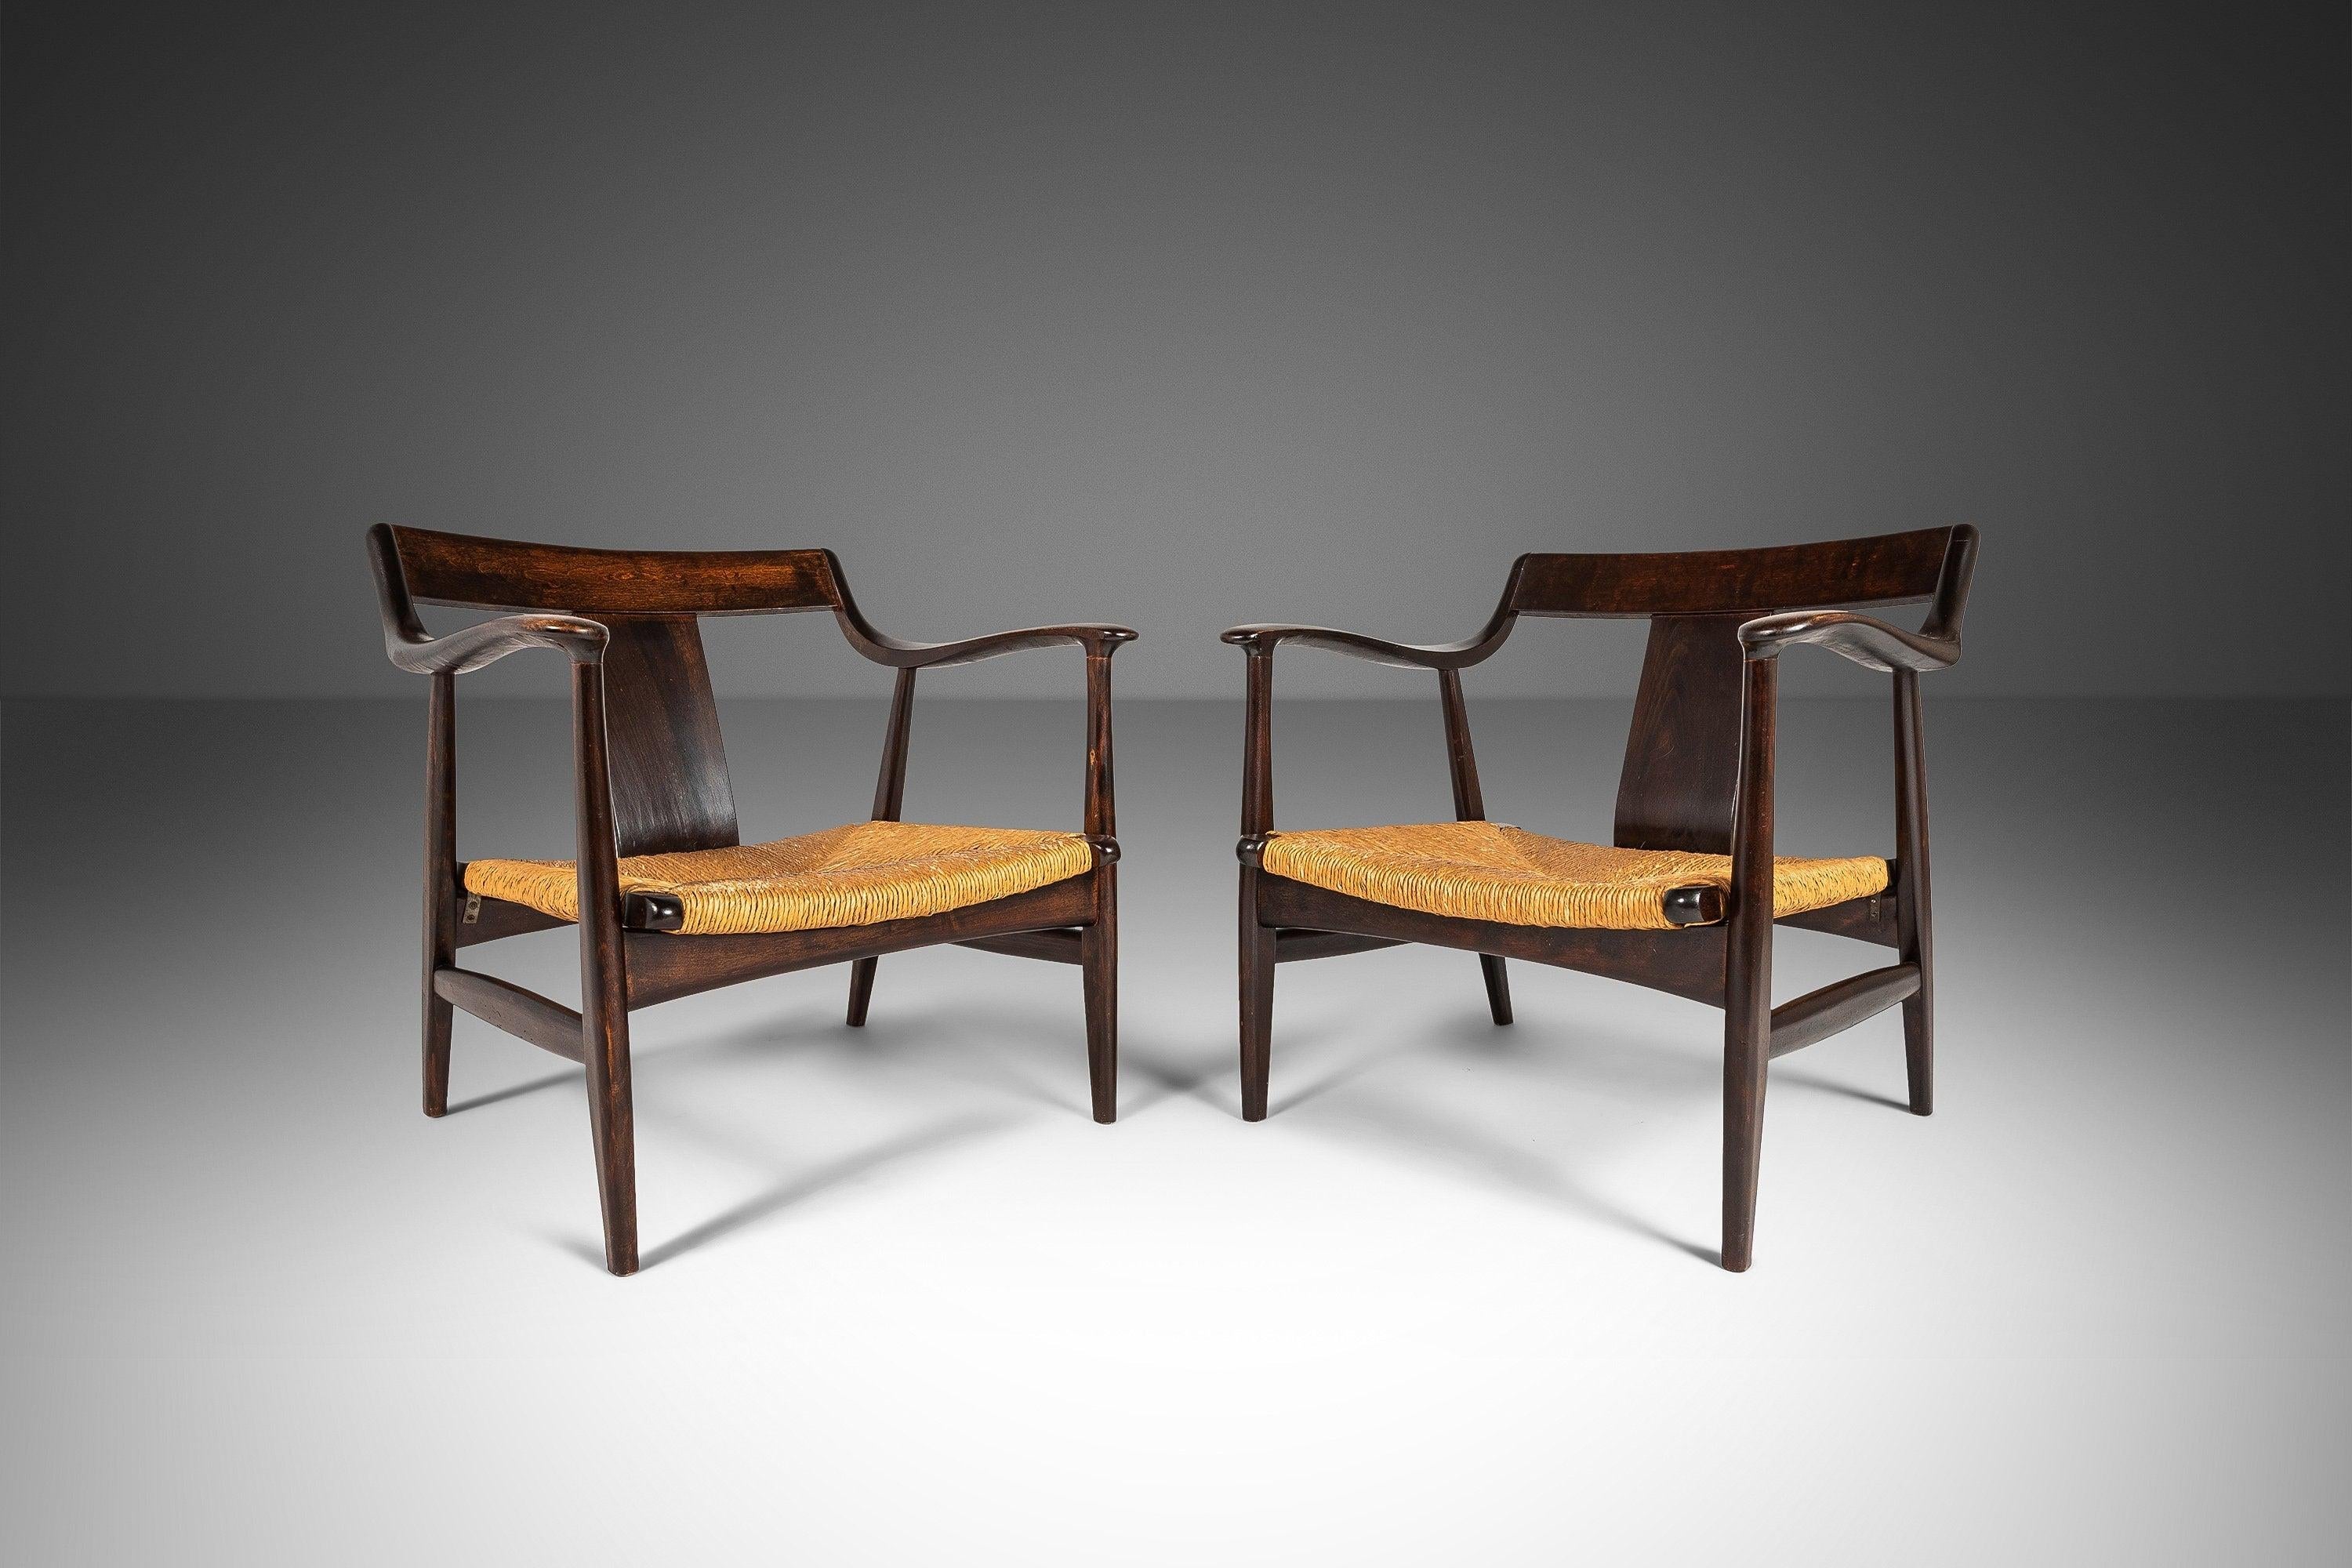 This set of two low profile lounge chairs are alluring, chic and most certainly eye-catching. A rare find originally sold by the Takumi Craft Store of Japan. The frames are constructed from Japanese Oak. The chairs have sleek, curvy arms which are